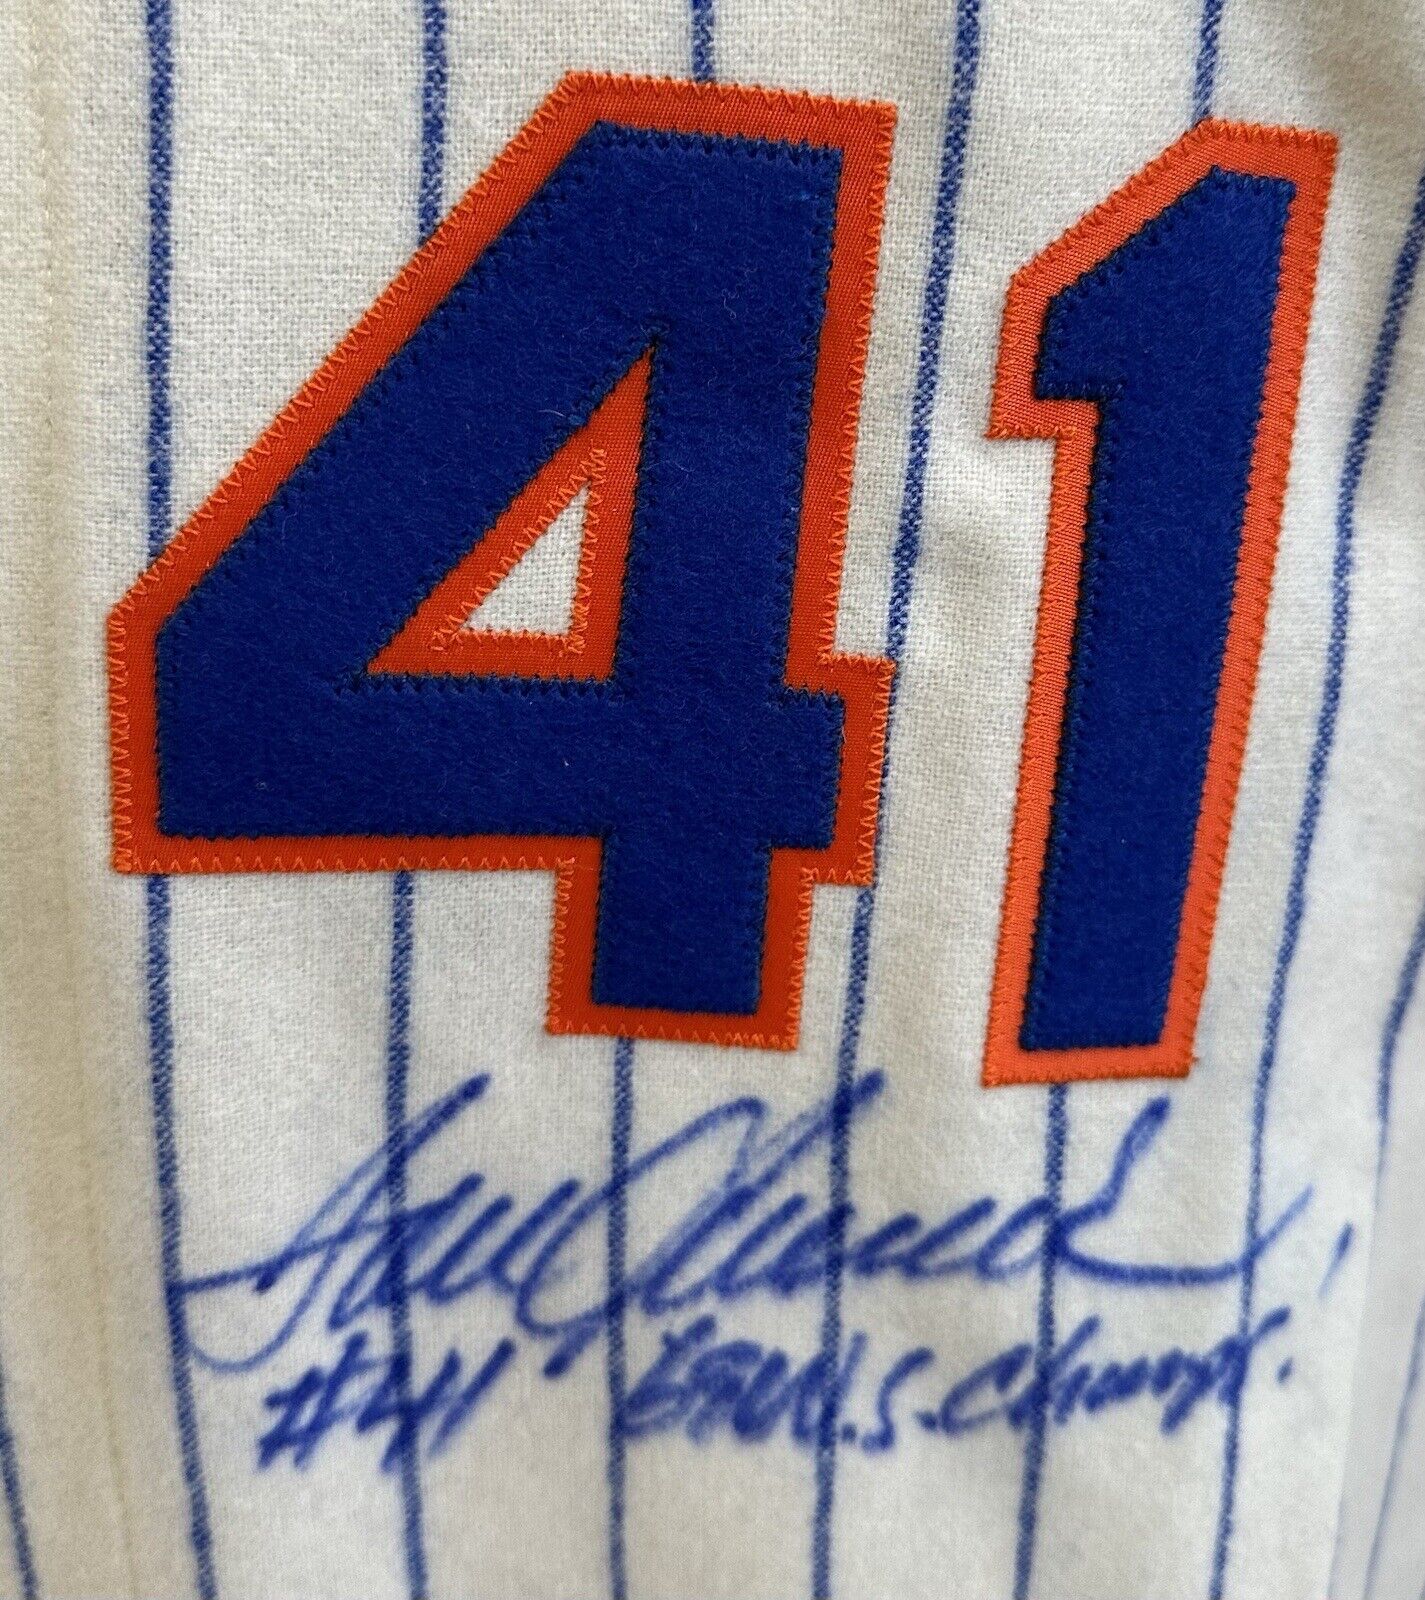 Tom Seaver Signed Mitchell & Ness Authentic Mets Jersey 1969 WS